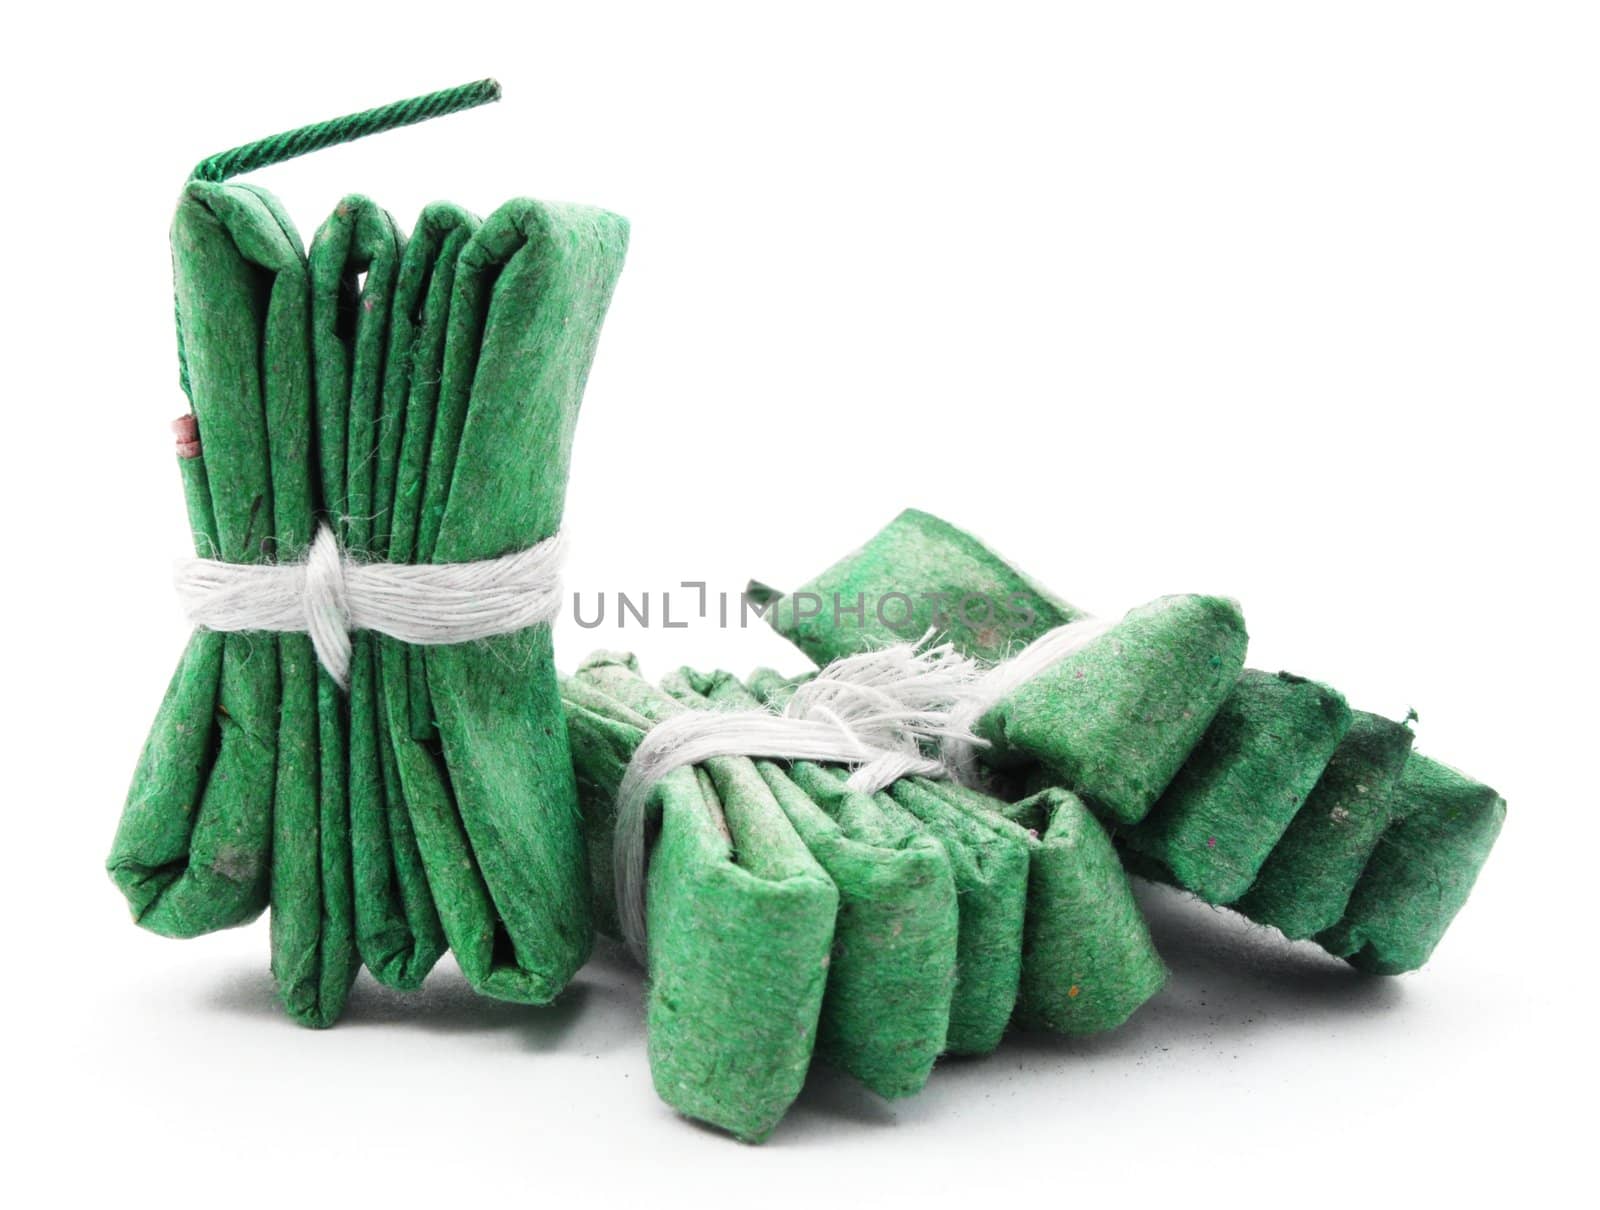 green firecracker isolated on white background showing new year concept